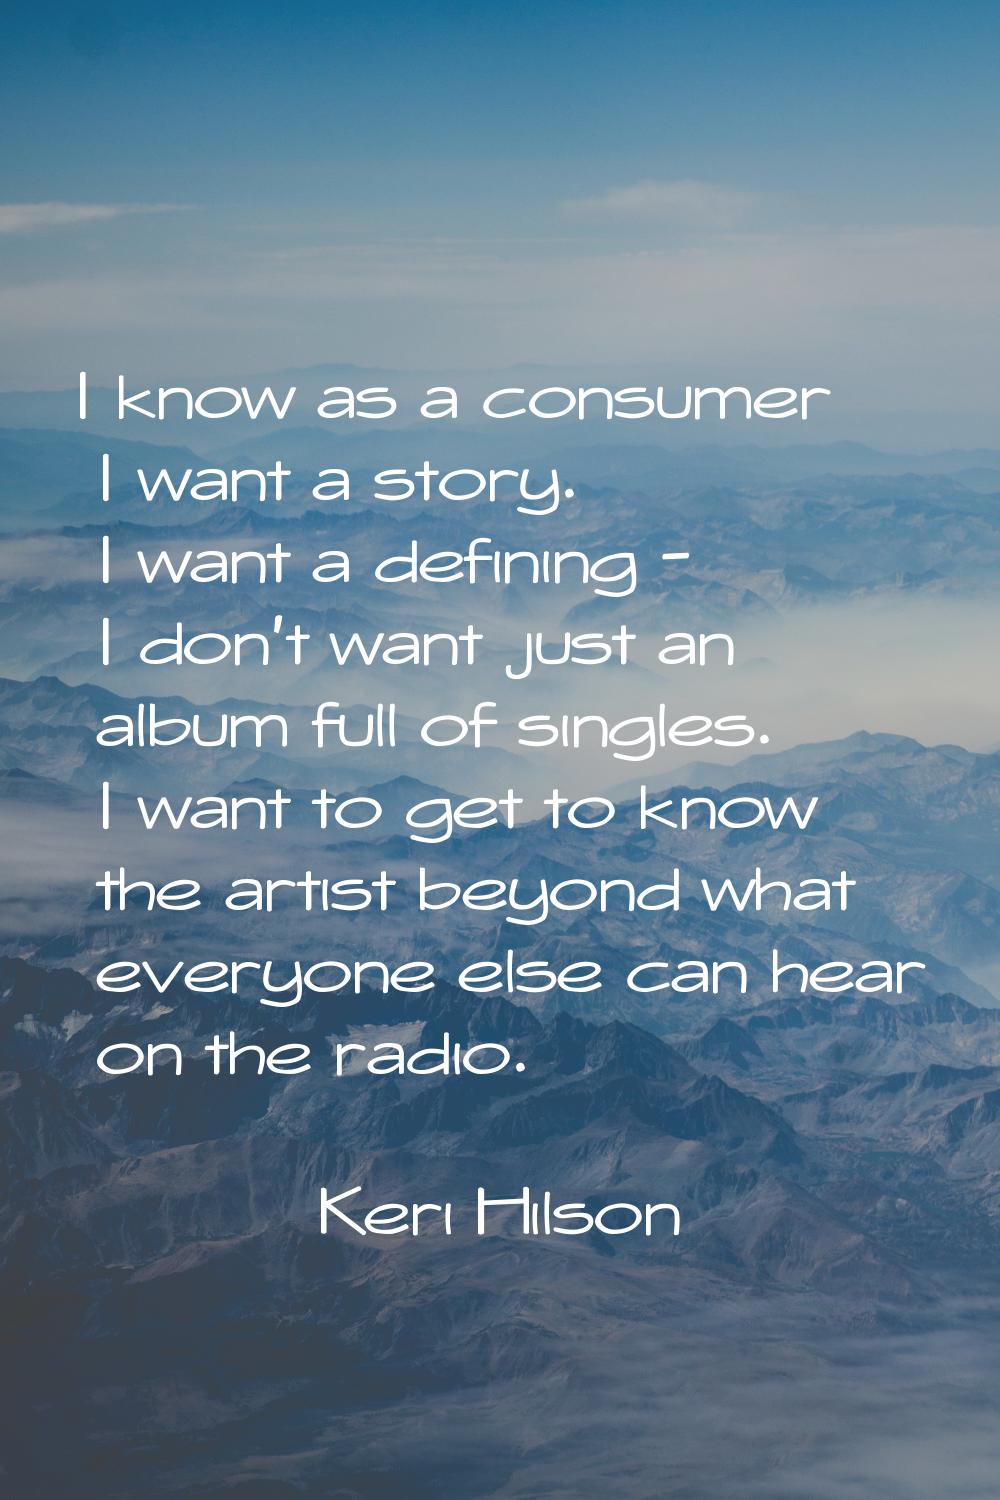 I know as a consumer I want a story. I want a defining - I don't want just an album full of singles